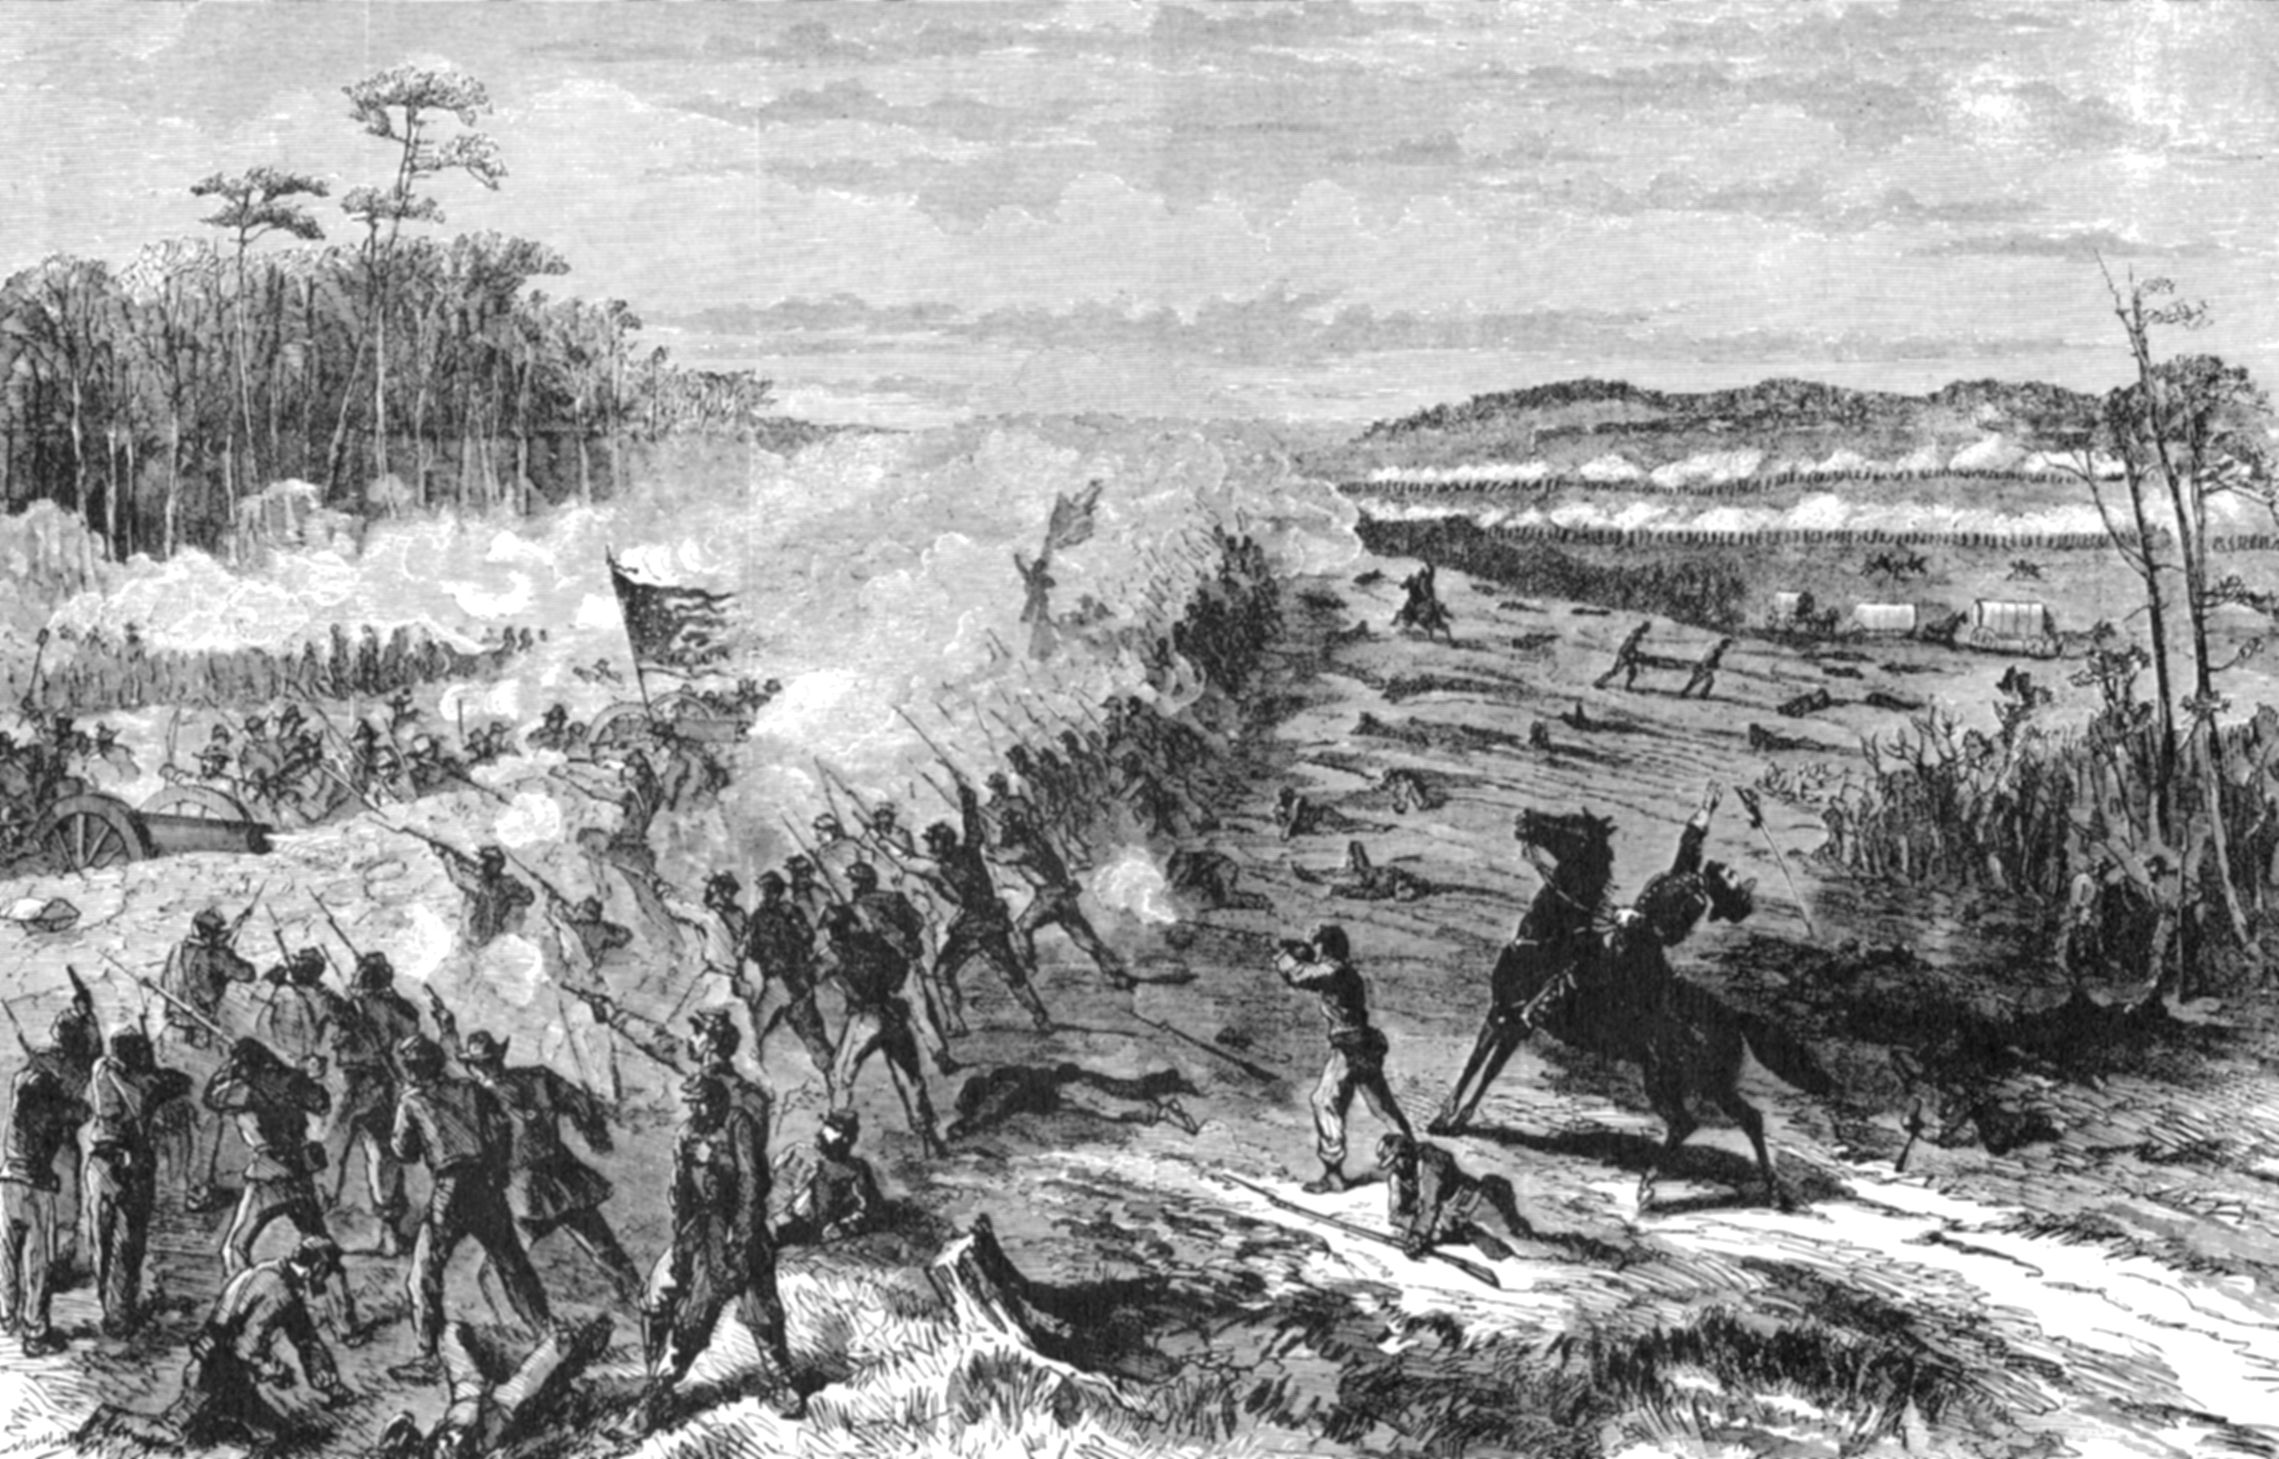 Charge of the 3rd Brigade, 1st Division, XVI Corps at Nashville. The corps was commanded by Major General A.N. Smith.